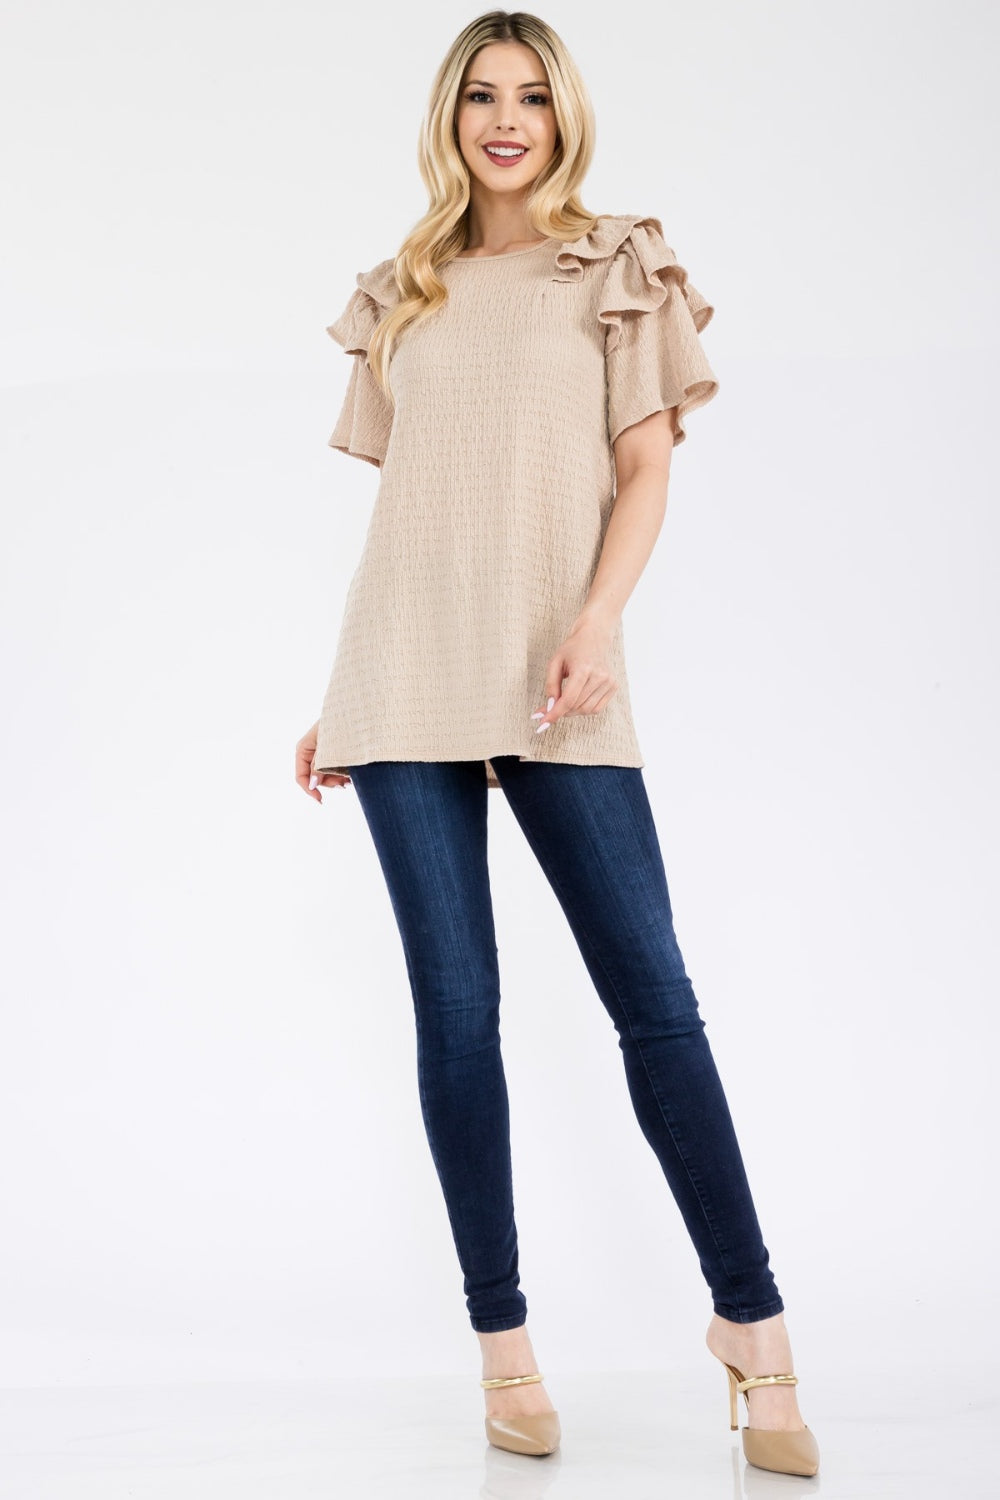 Plus Size Ruffle Layered Short Sleeve Texture Top